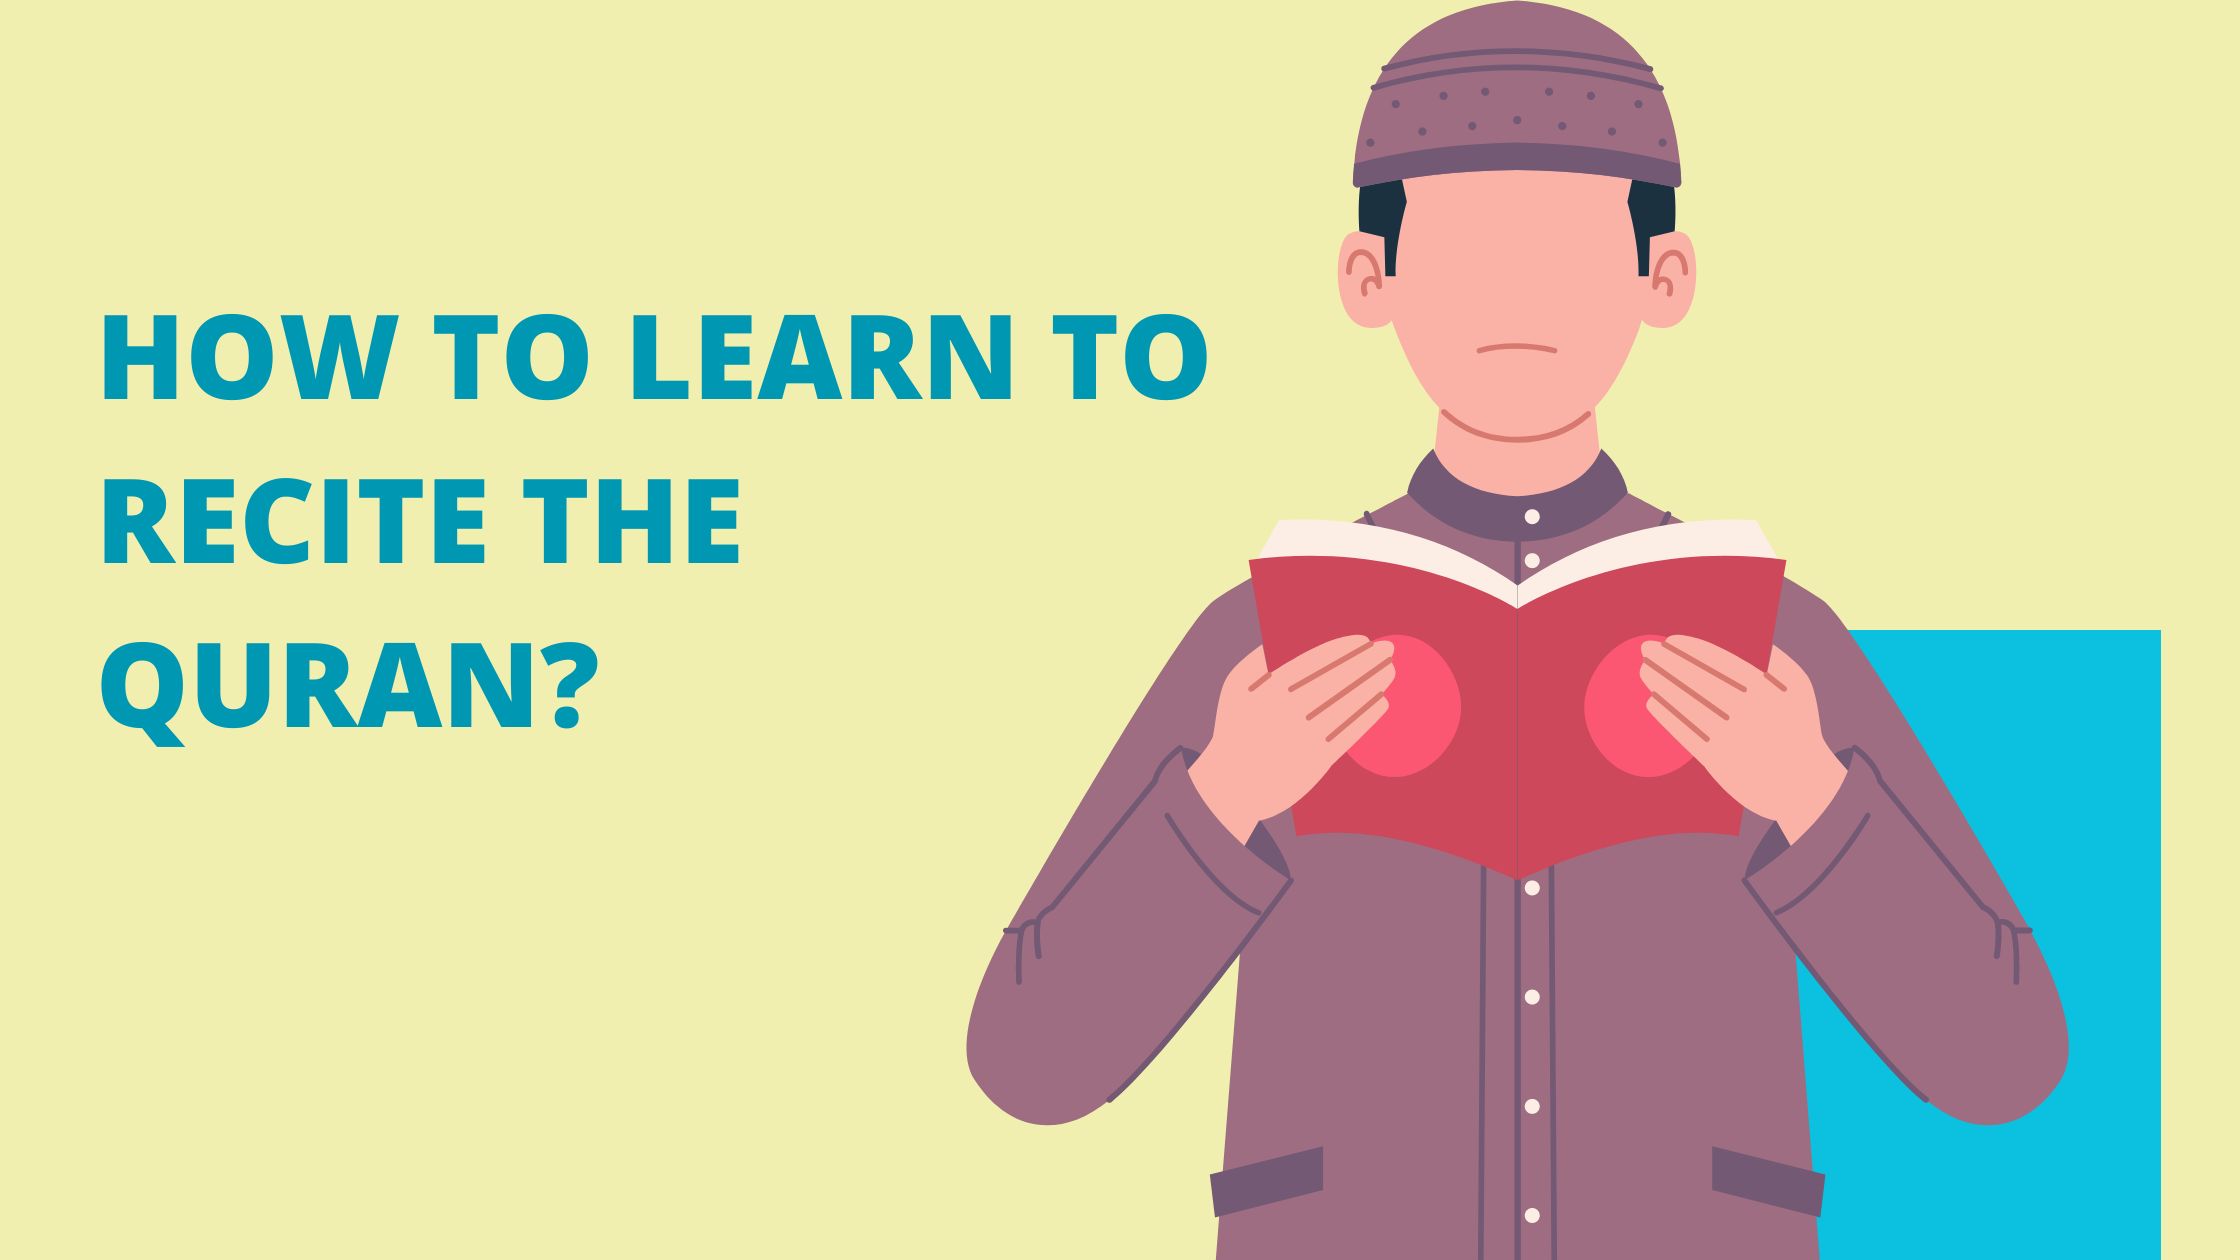 How To Learn To Recite The Quran